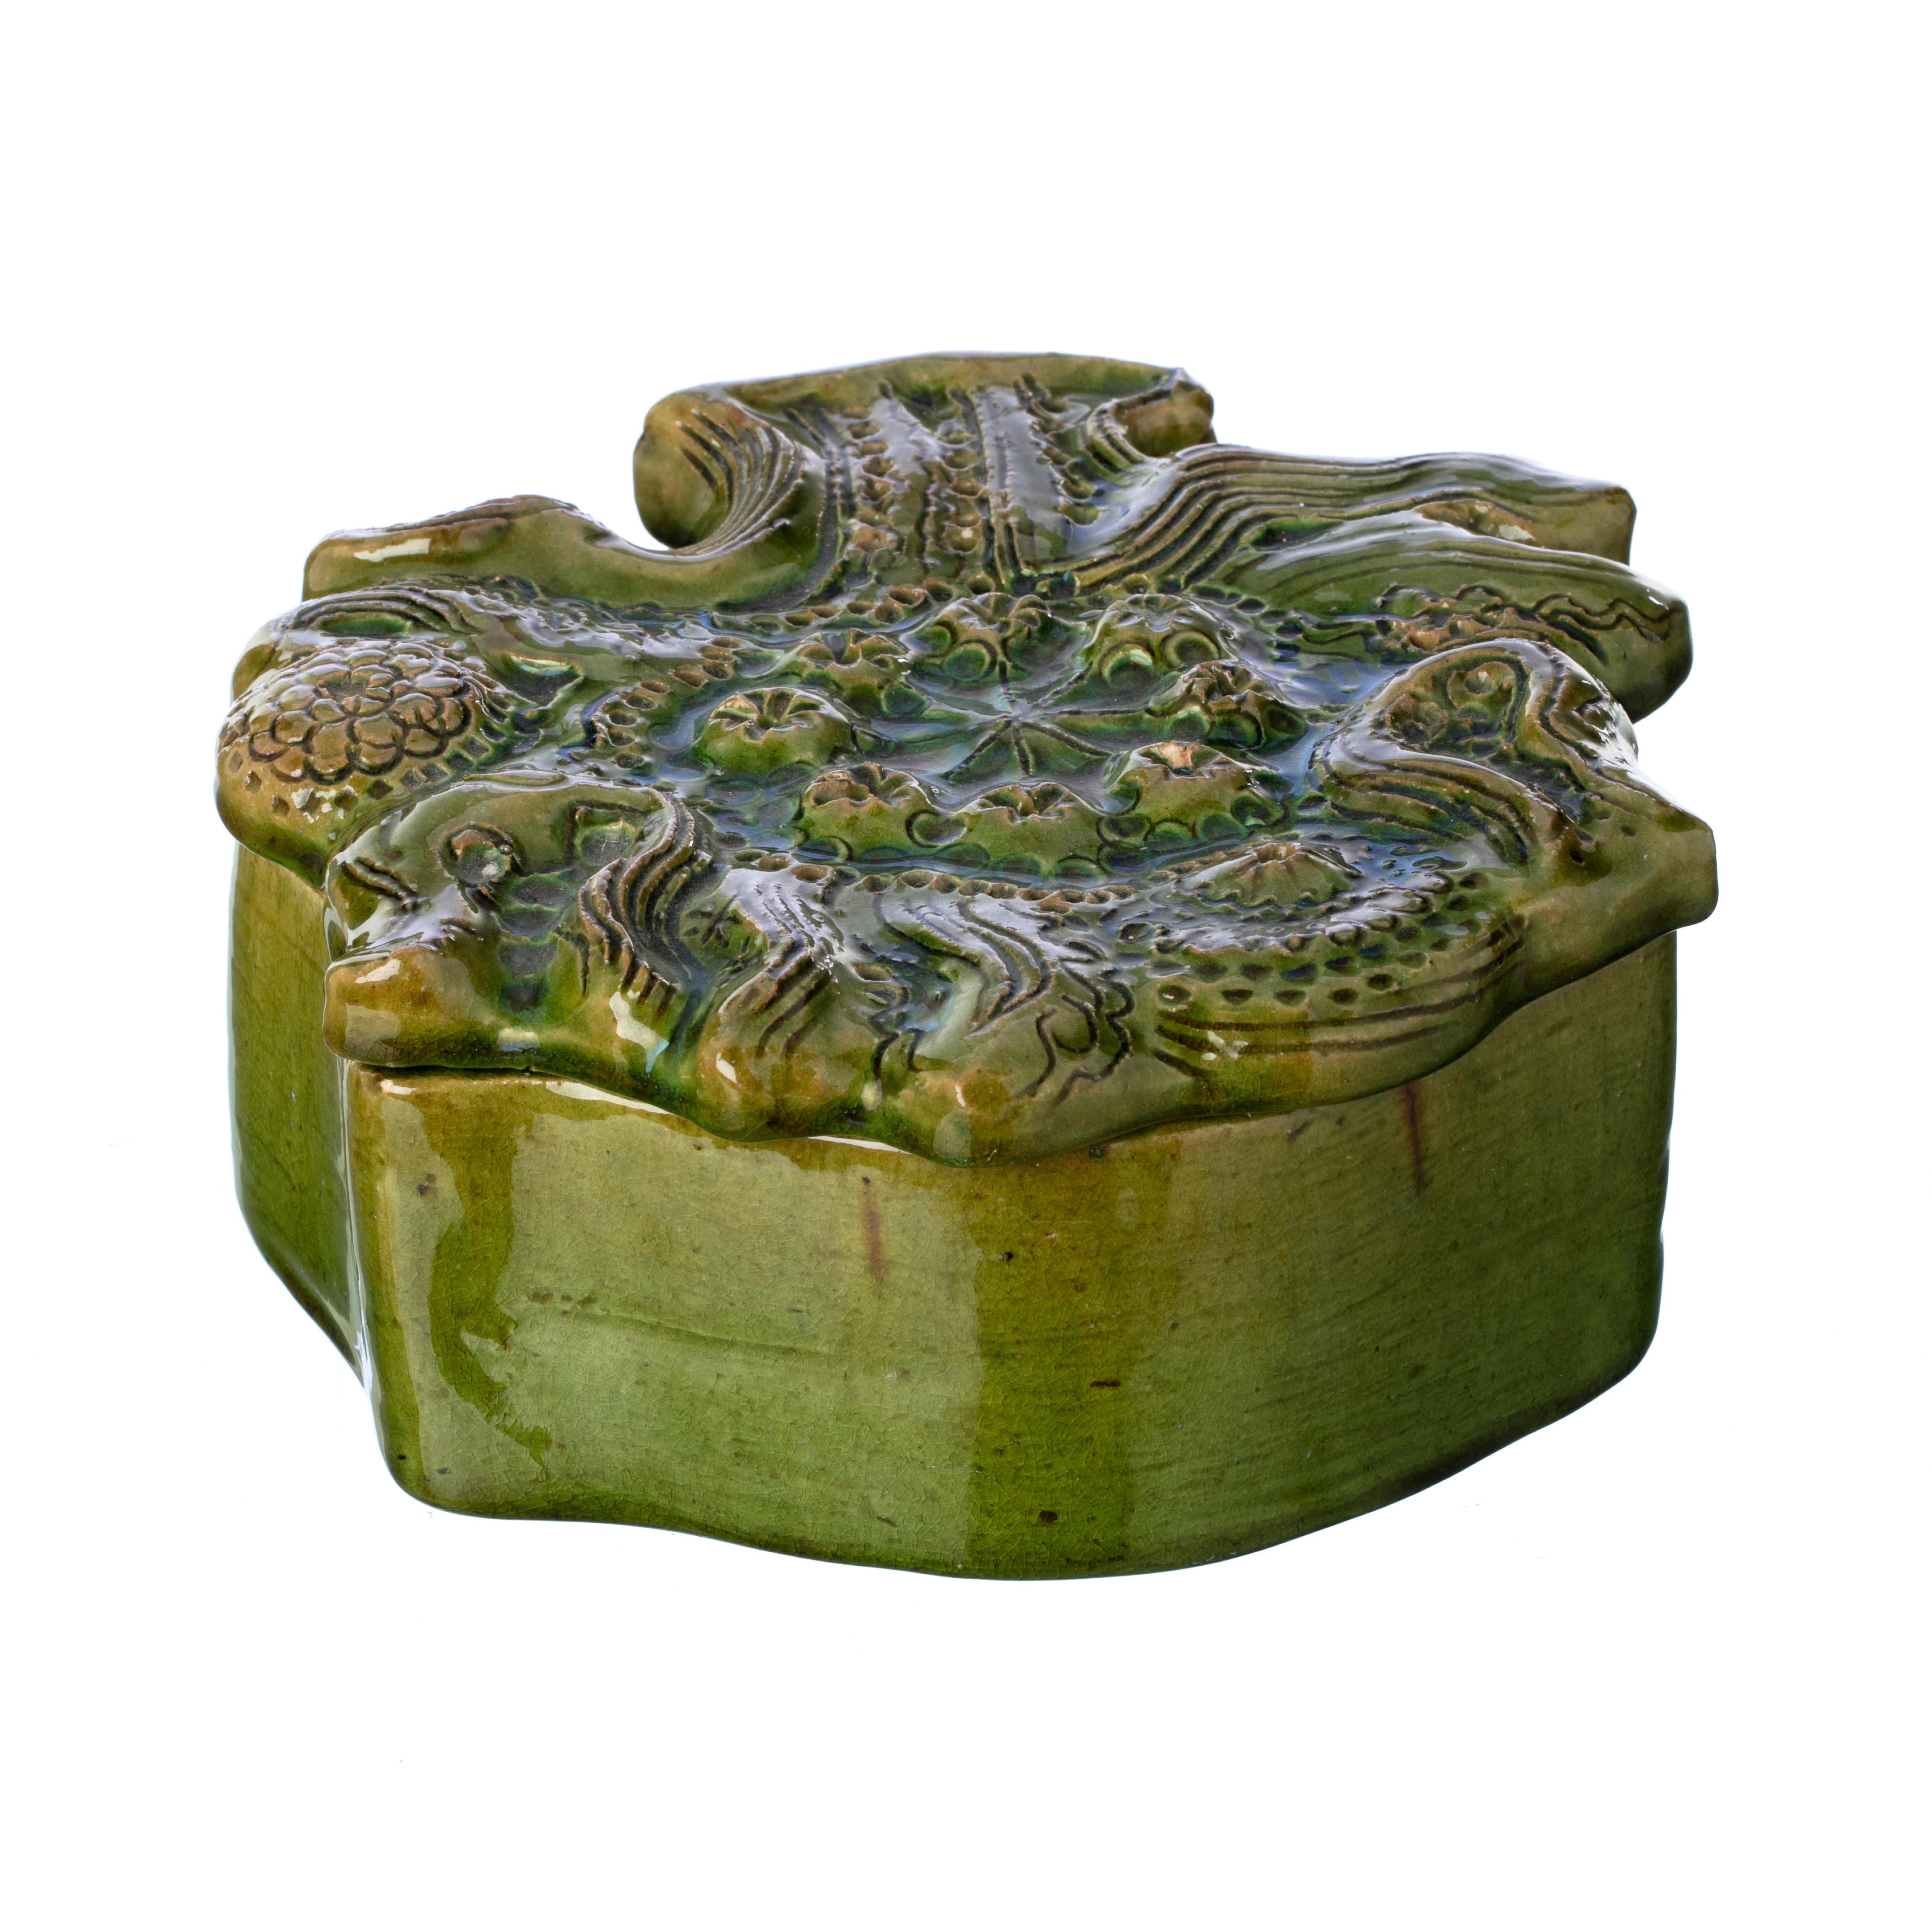 A ceramic green glazed jewelry box by Georges Jouve, c.1949. Of sculptural form wonderfully modelled representing the 'tree of life'. Incised signed ''Apollon' mark on backside. Provenance: Private French Collection.